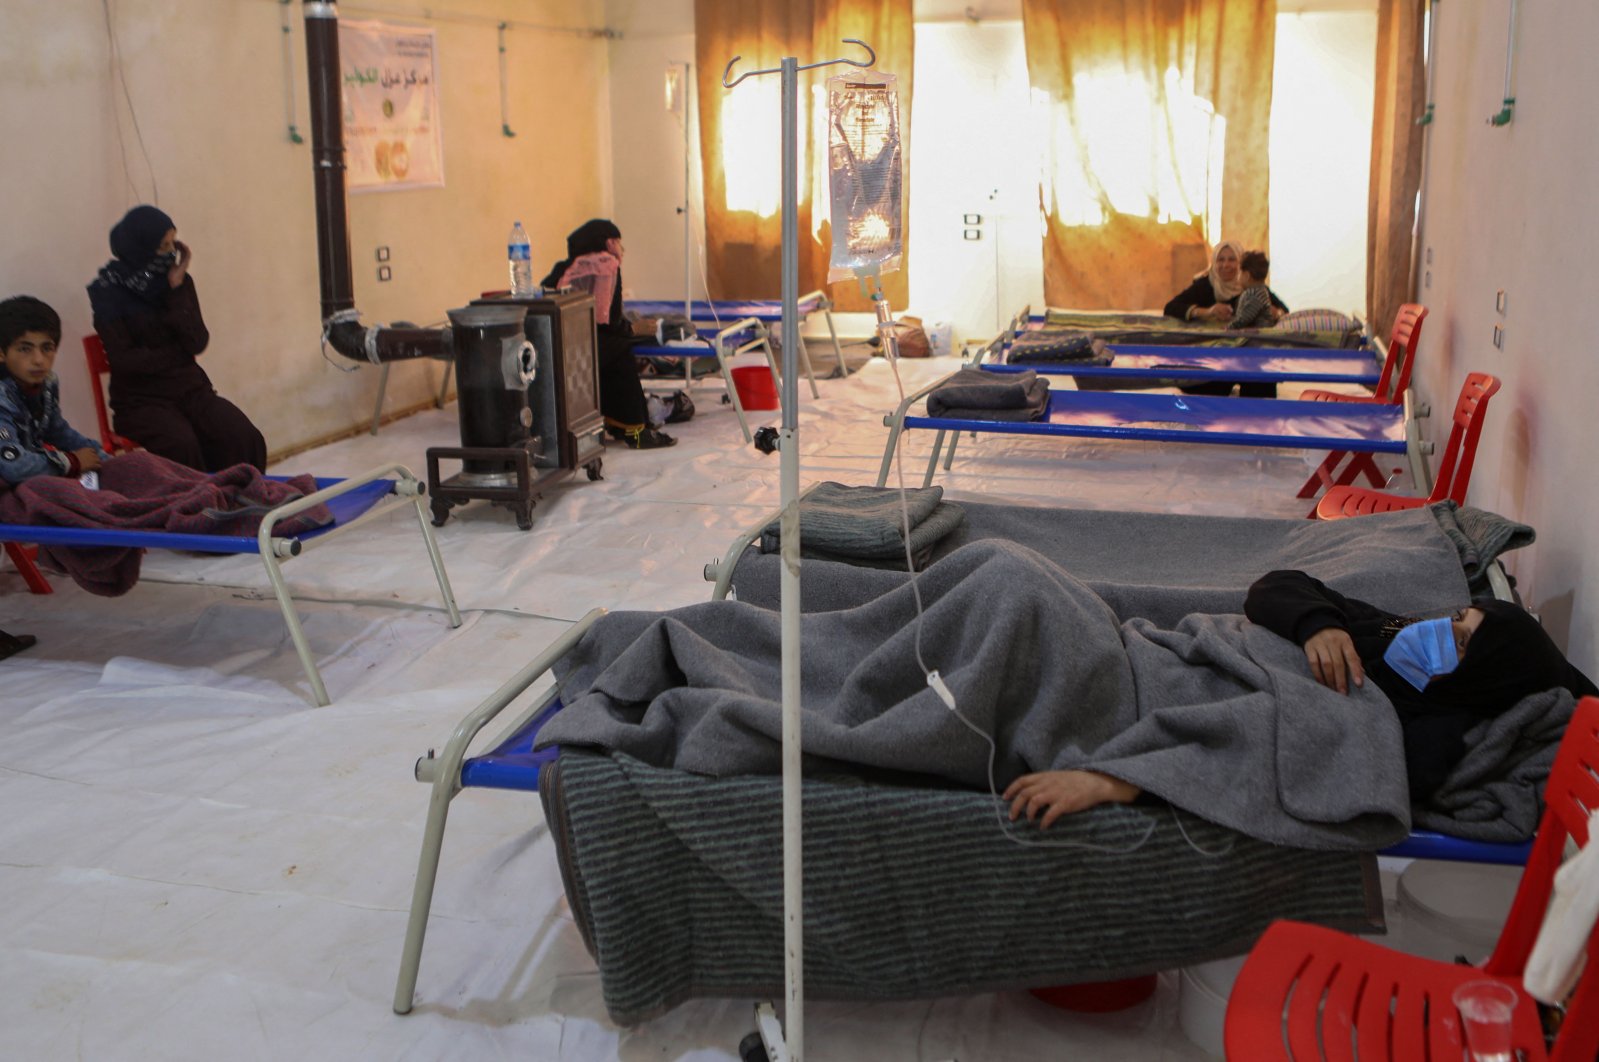 Patients receive treatment at a recently-opened medical center for cholera cases in the Syrian town of Darkush, on the outskirts of the opposition-held northwestern province of Idlib, Oct. 22, 2022. (AFP Photo)